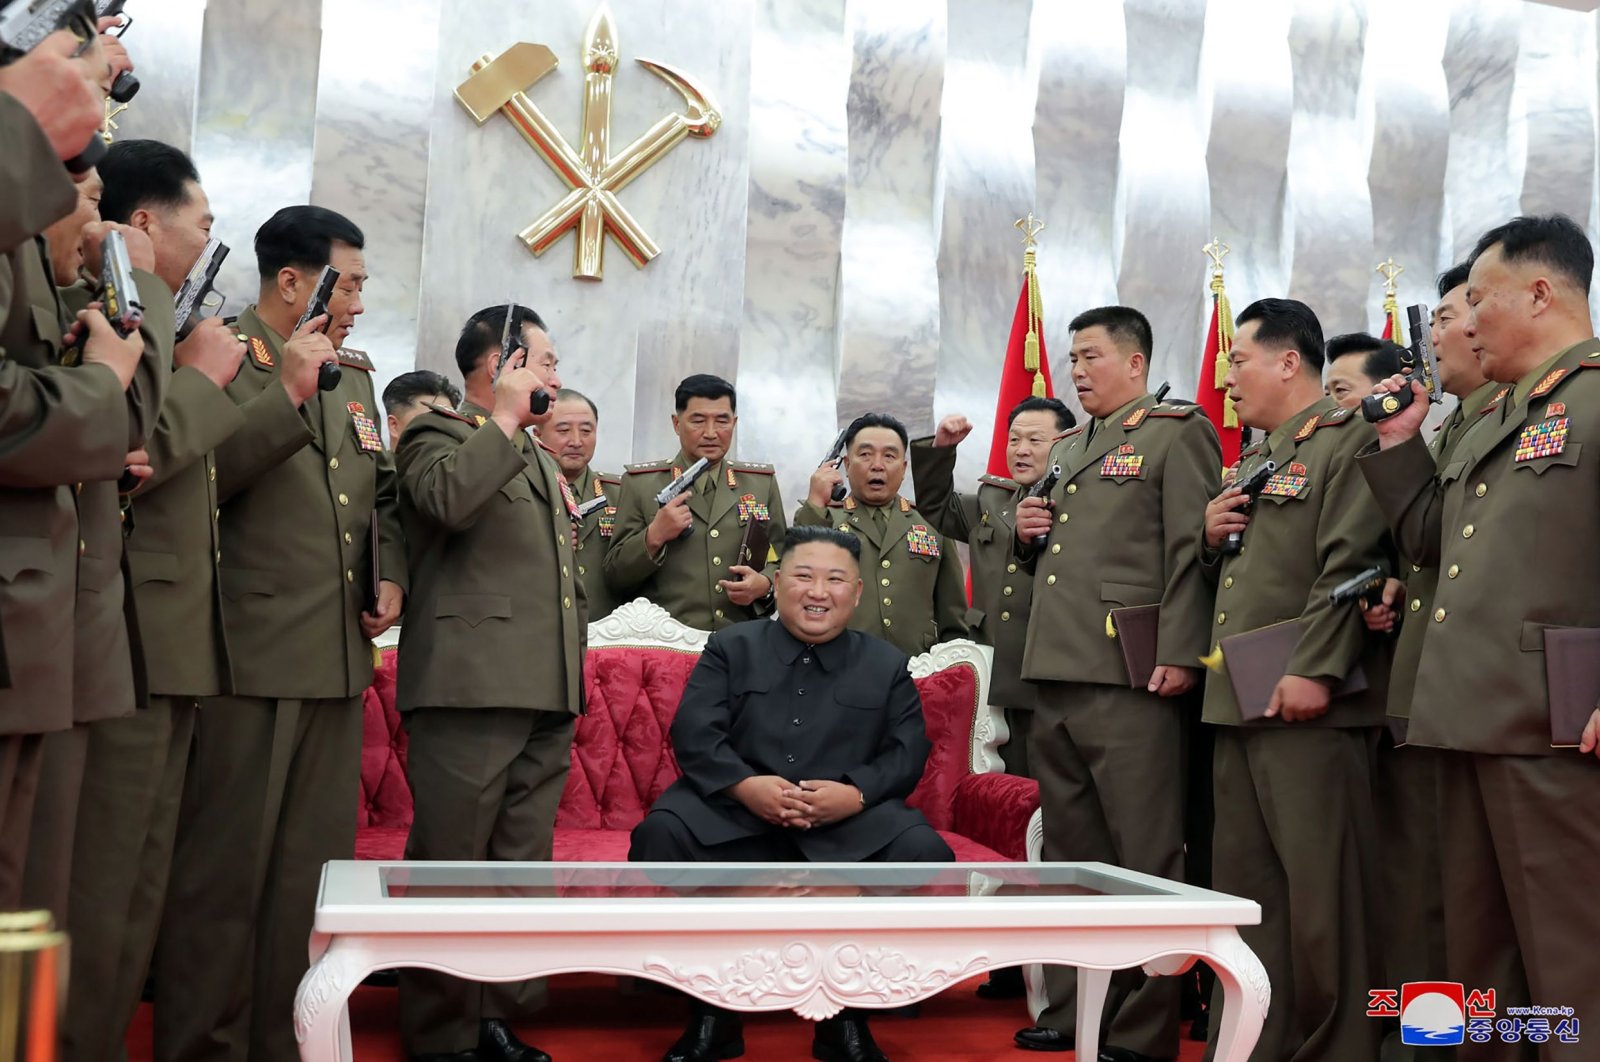 North Korean leader Kim Jong Un (C) attends a ceremony to commemorate the 67th anniversary of the Korean War cease-fire in Pyongyang, North Korea, July 27, 2020. (KCNA Photo via AFP)